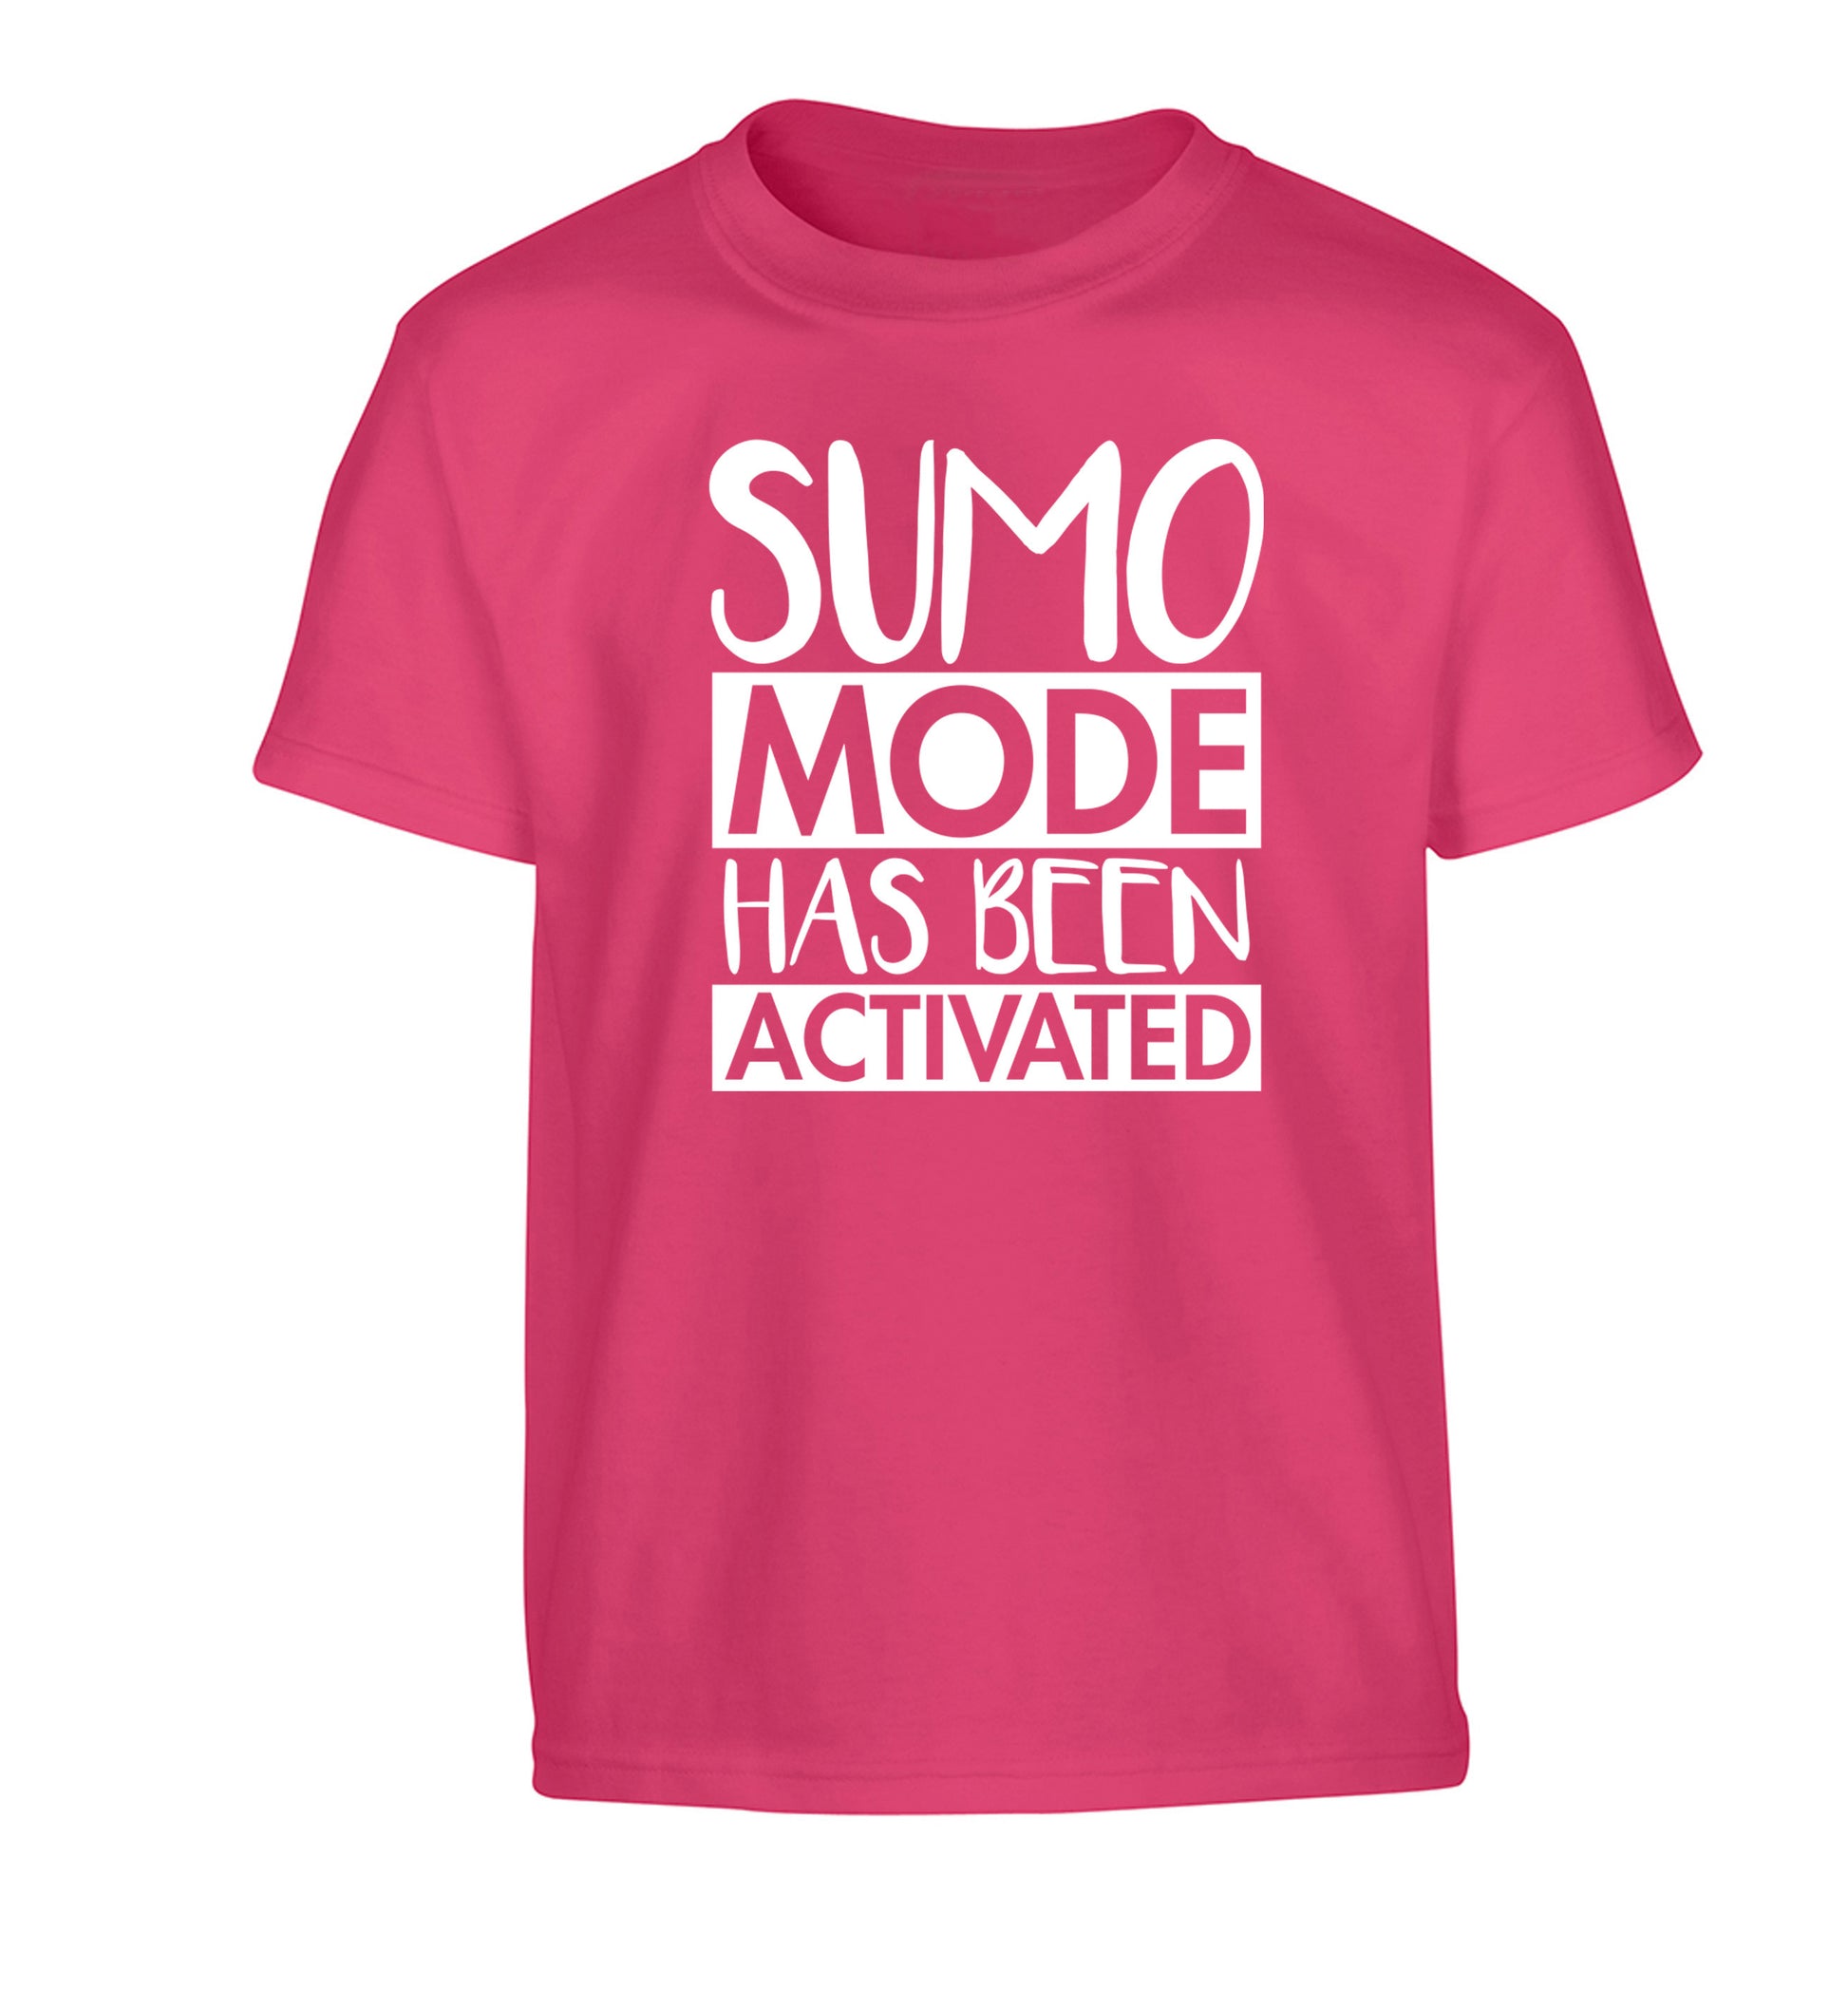 Sumo mode activated Children's pink Tshirt 12-14 Years